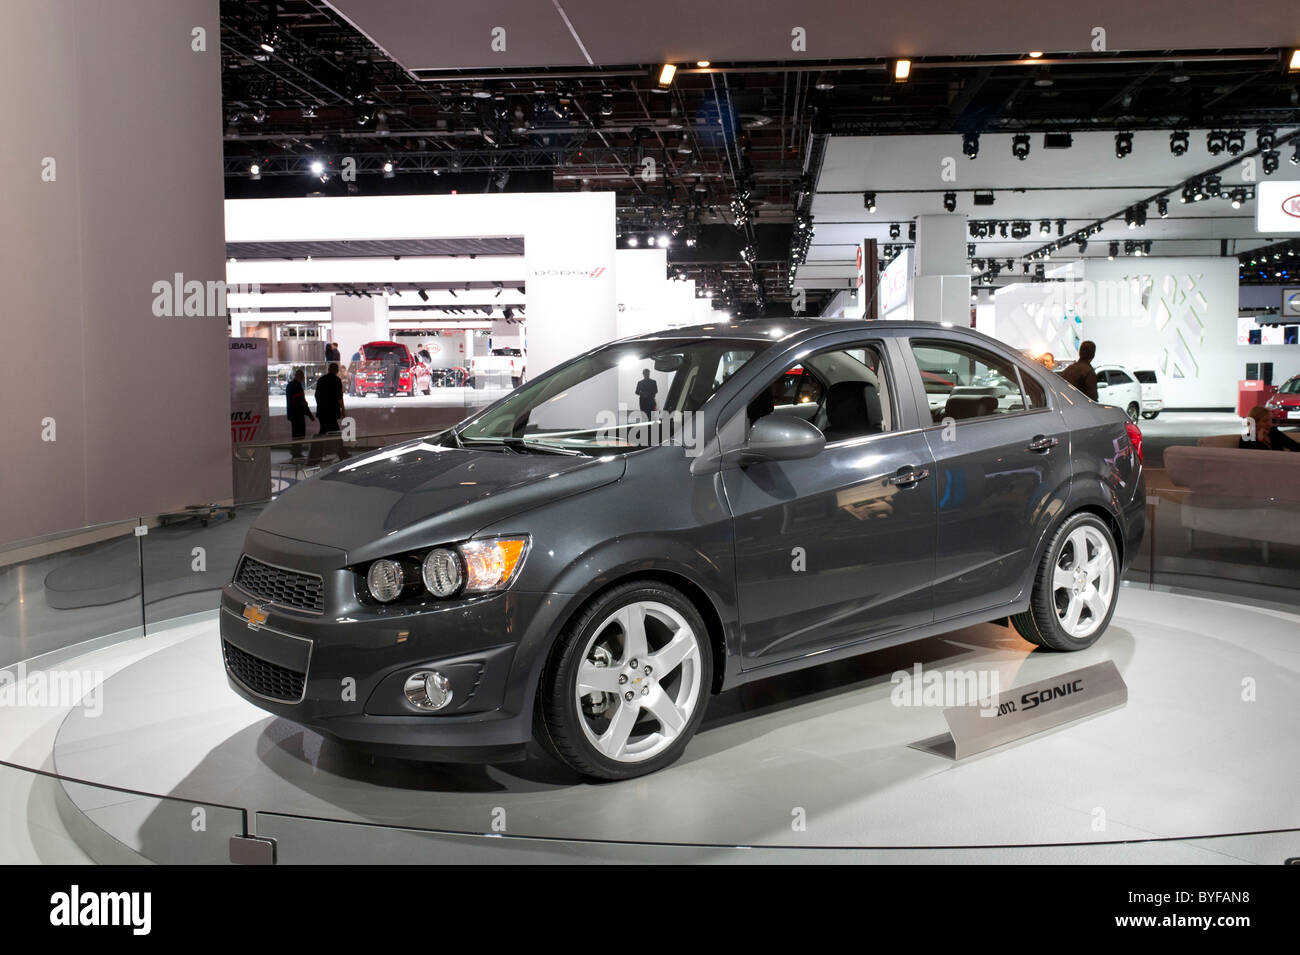 2012 Chevrolet Sonic at the 2011 North American International Auto Show in Detroit. Stock Photo